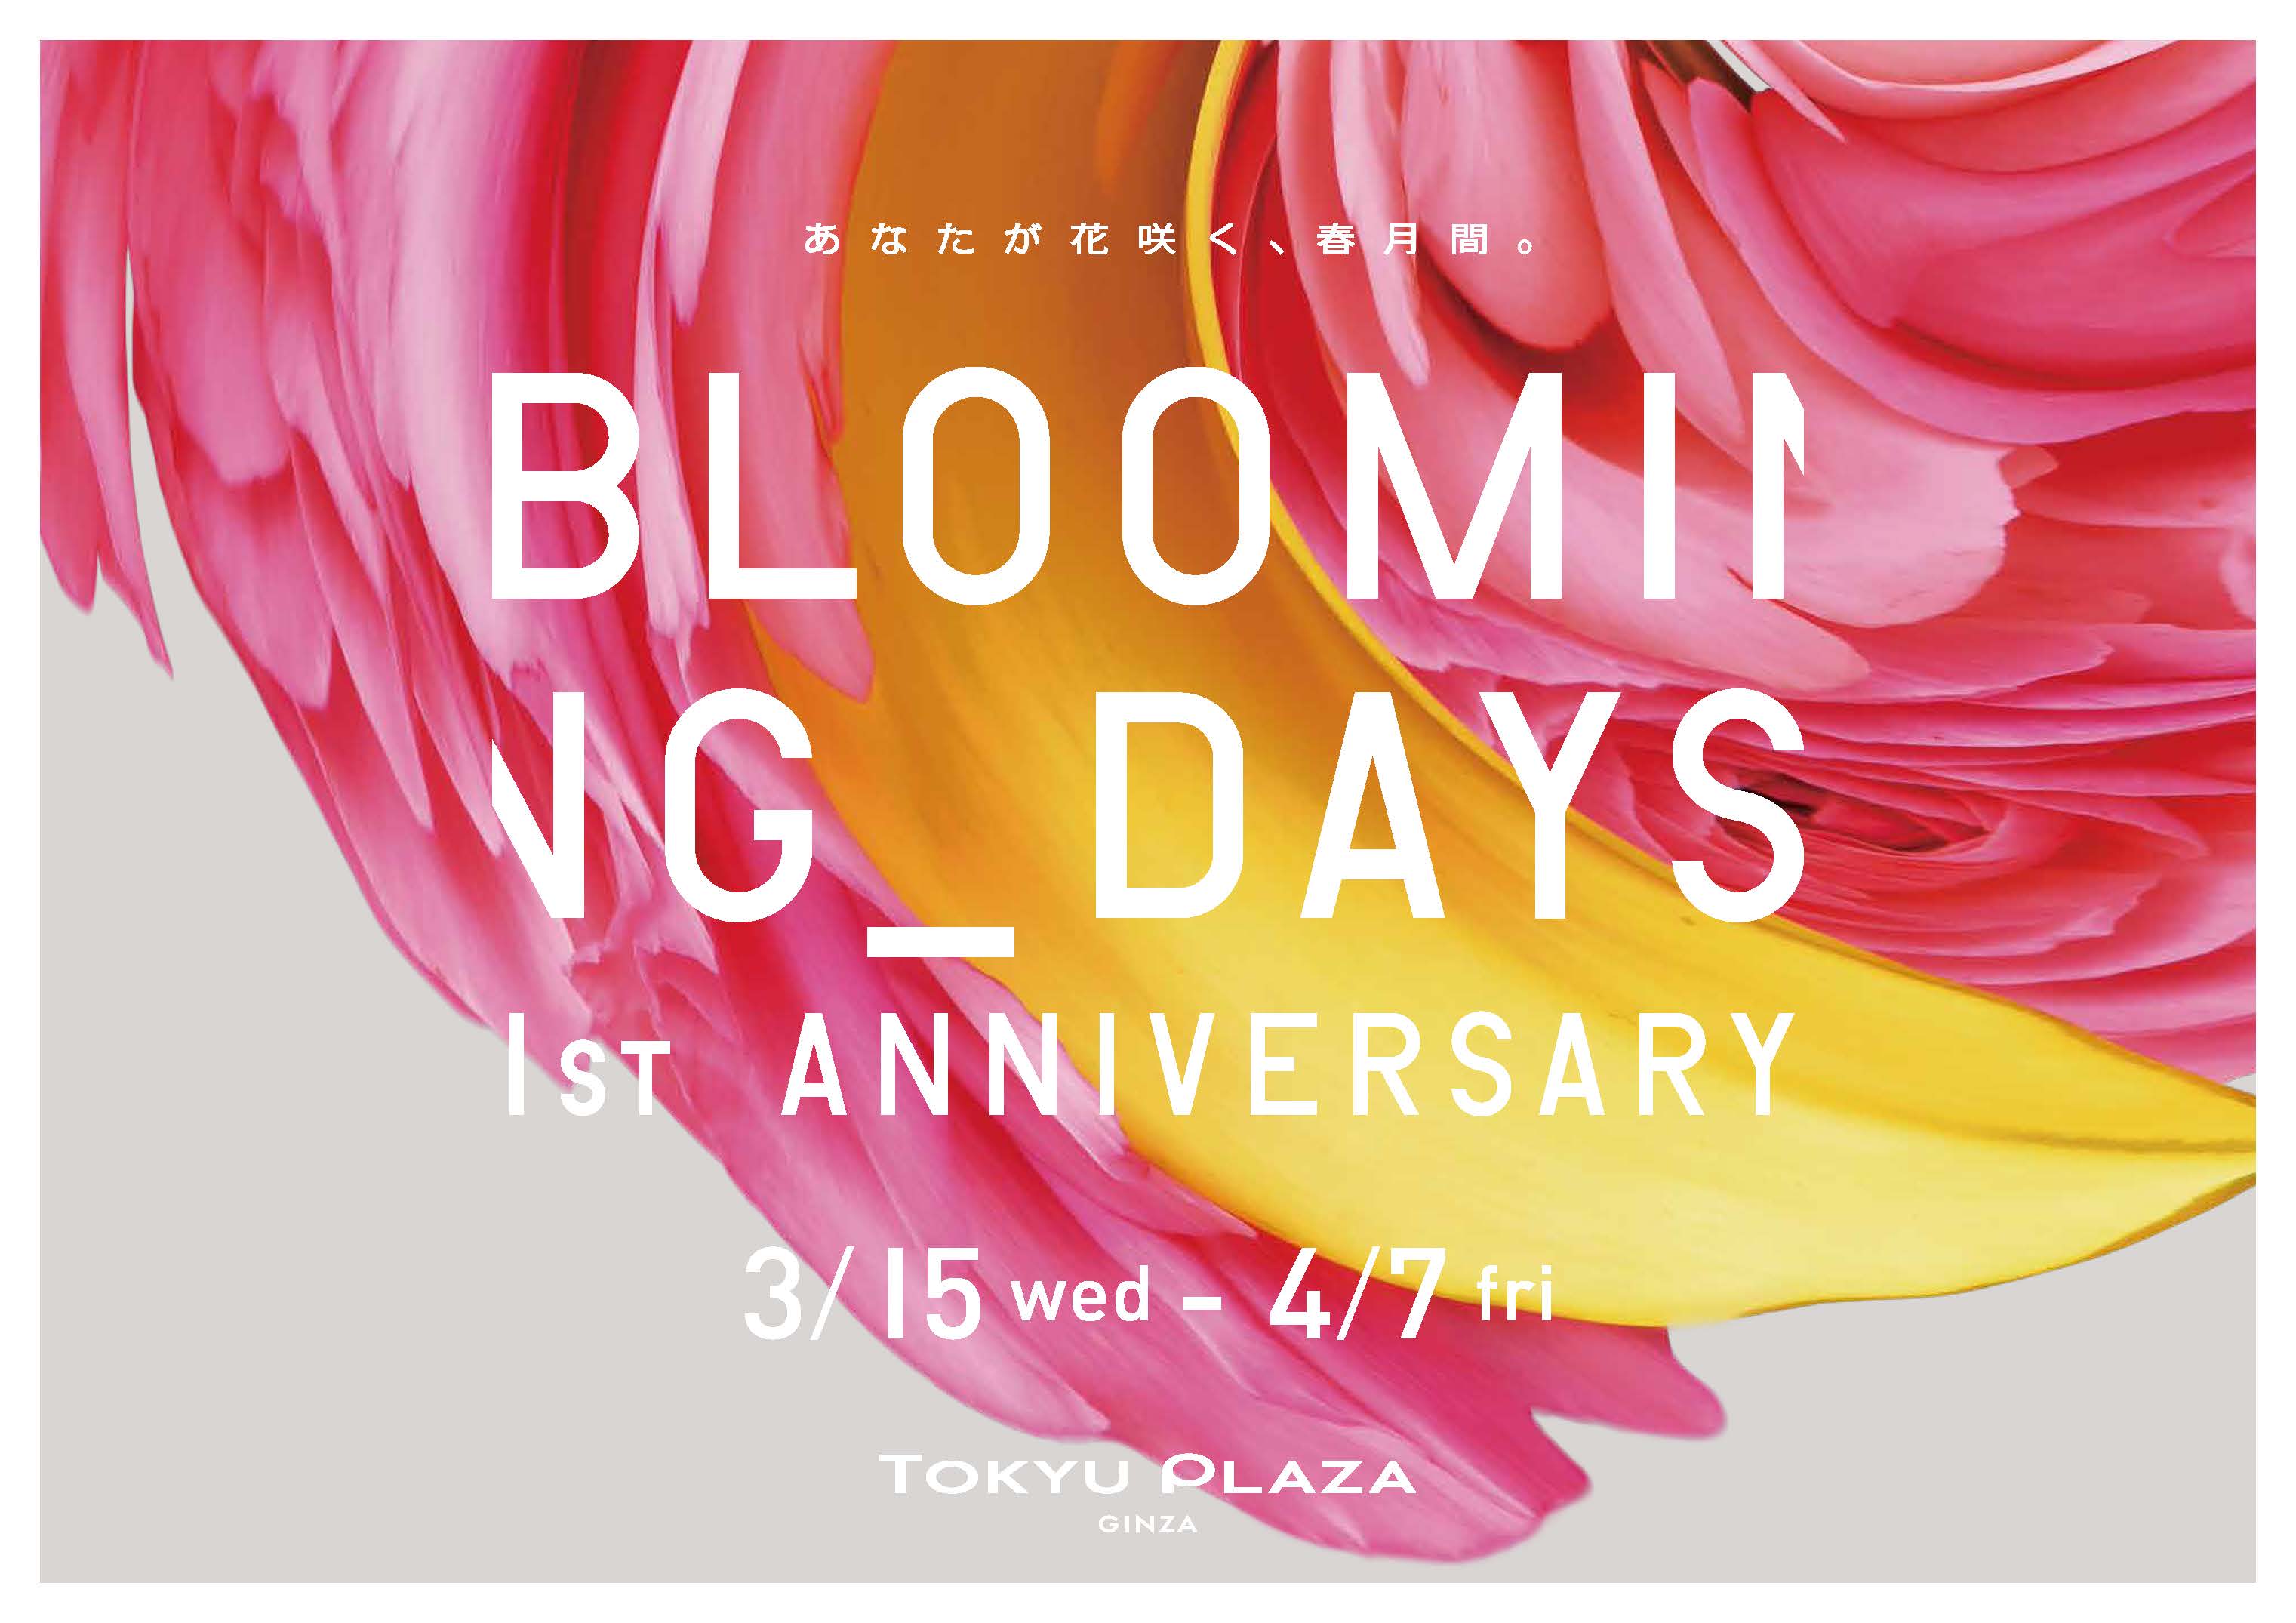 Tokyu Plaza Ginza Launches Campaign 1 Year Anniversary Campaign Spring Is Celebrating The 1st Anniversary Of Blooming Days 1st Anniversary Develops Events And Special Projects On The Theme Of Bloom Kokosil Ginza